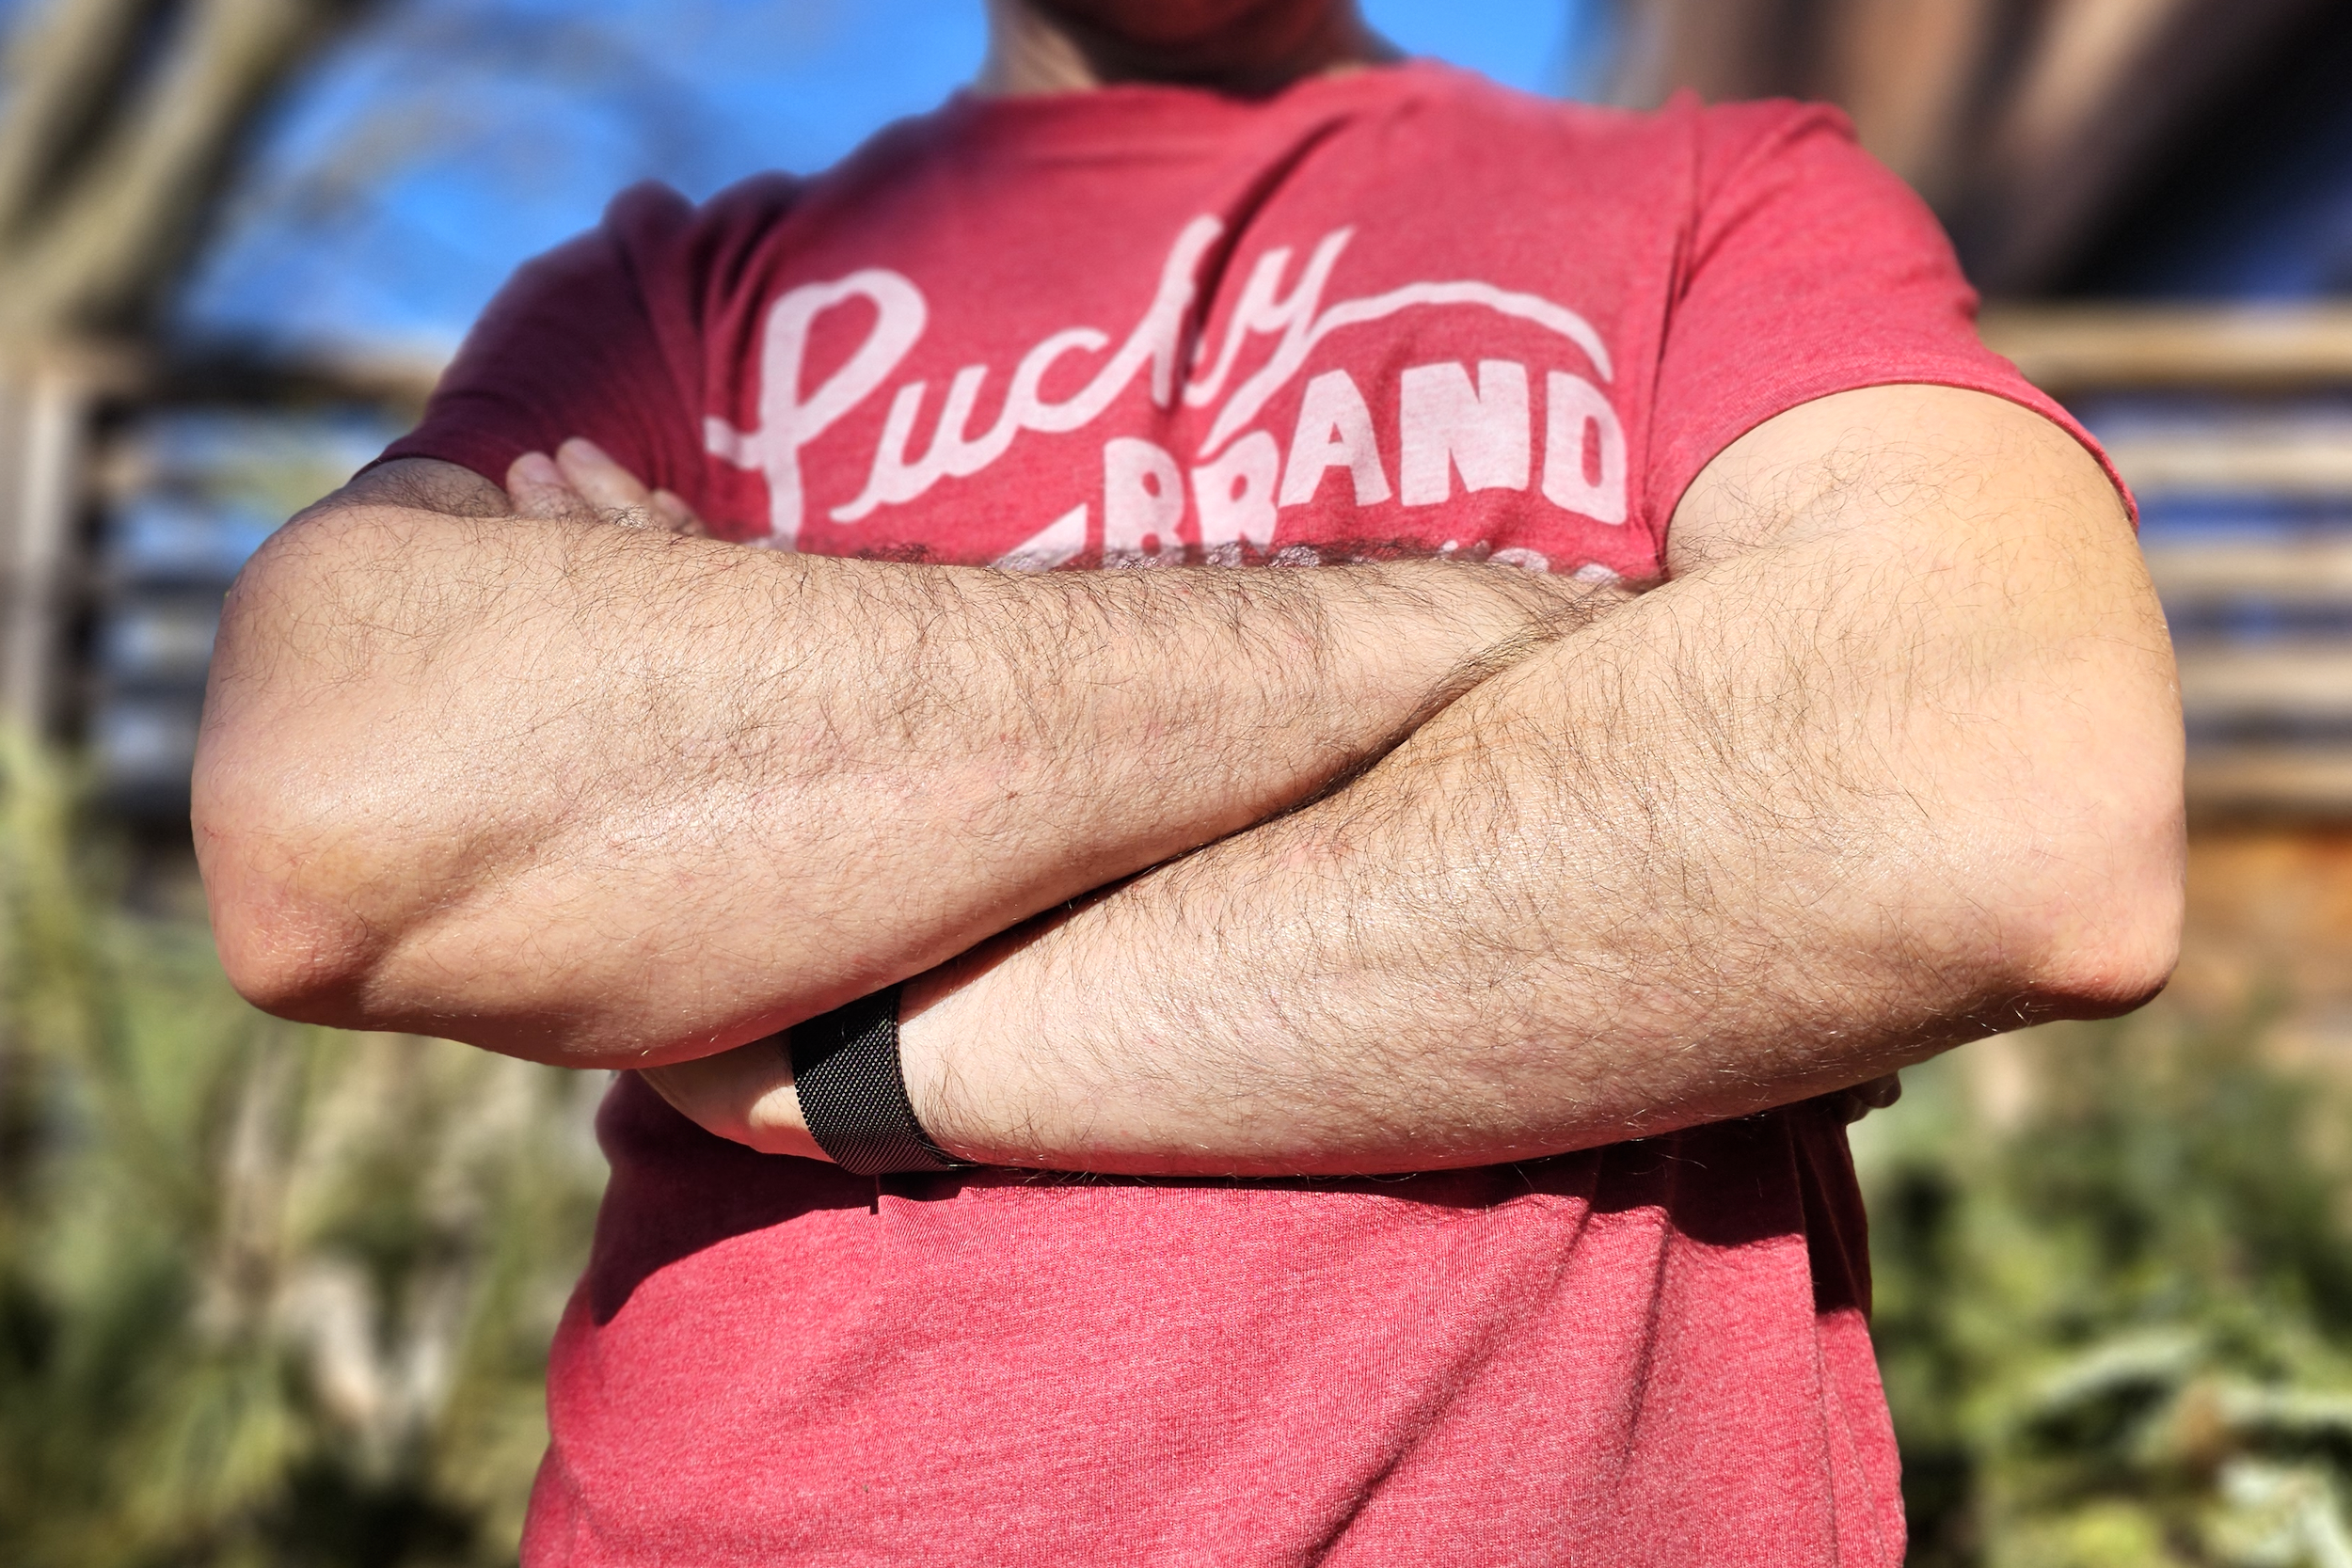 Simon Cohen wearing an Apple Watch while crossing his arms.